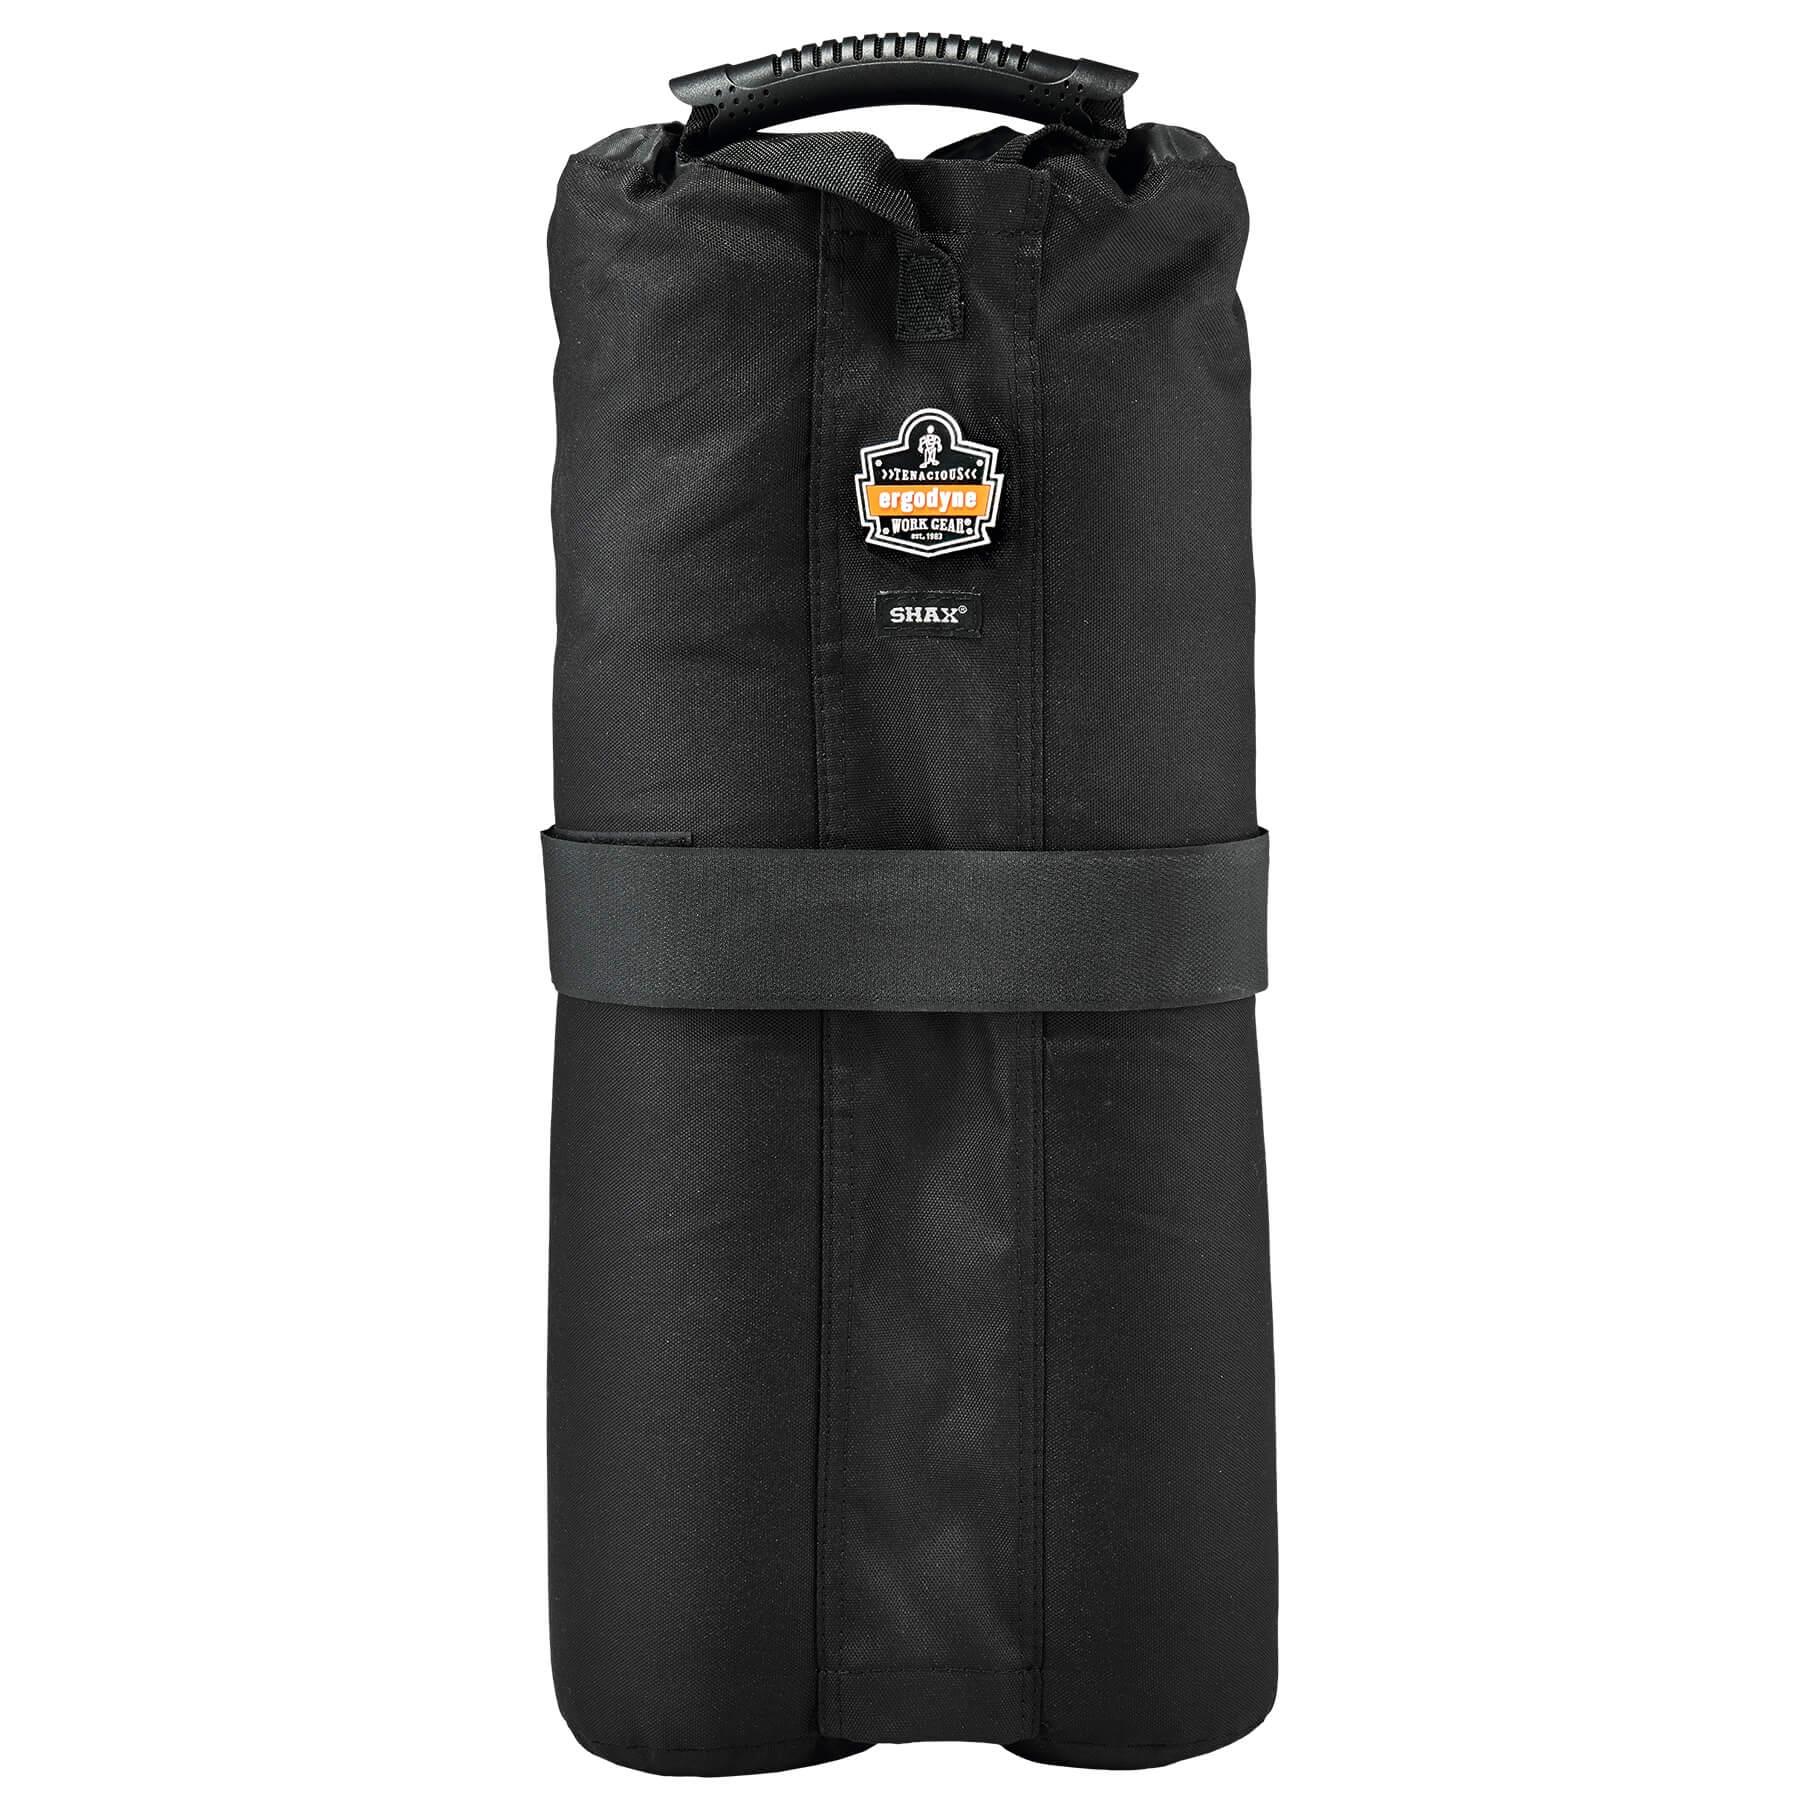 SHAX 6094 TENT WEIGHT BAGS SET OF 2